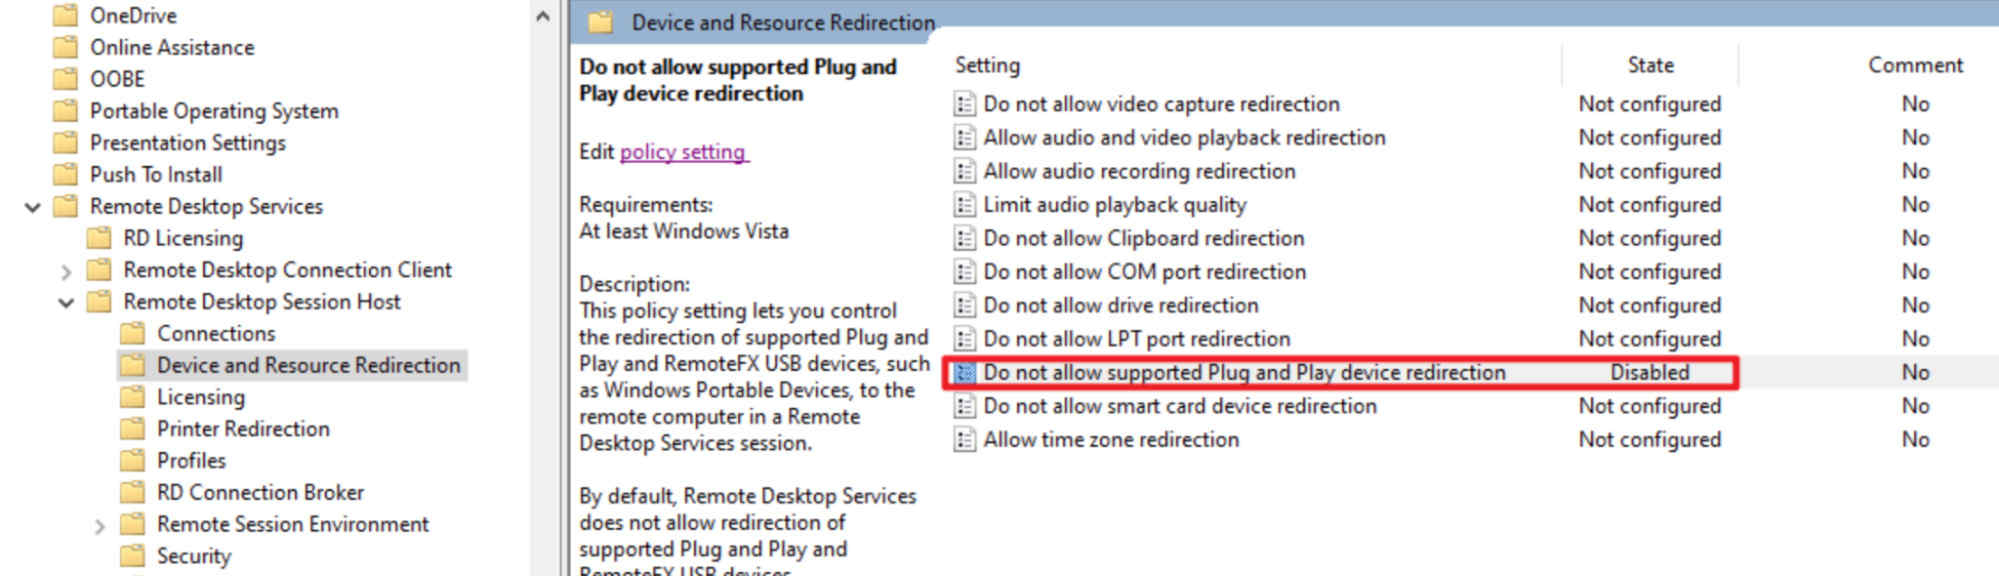 Do not allow supported Plug and Play device redirection